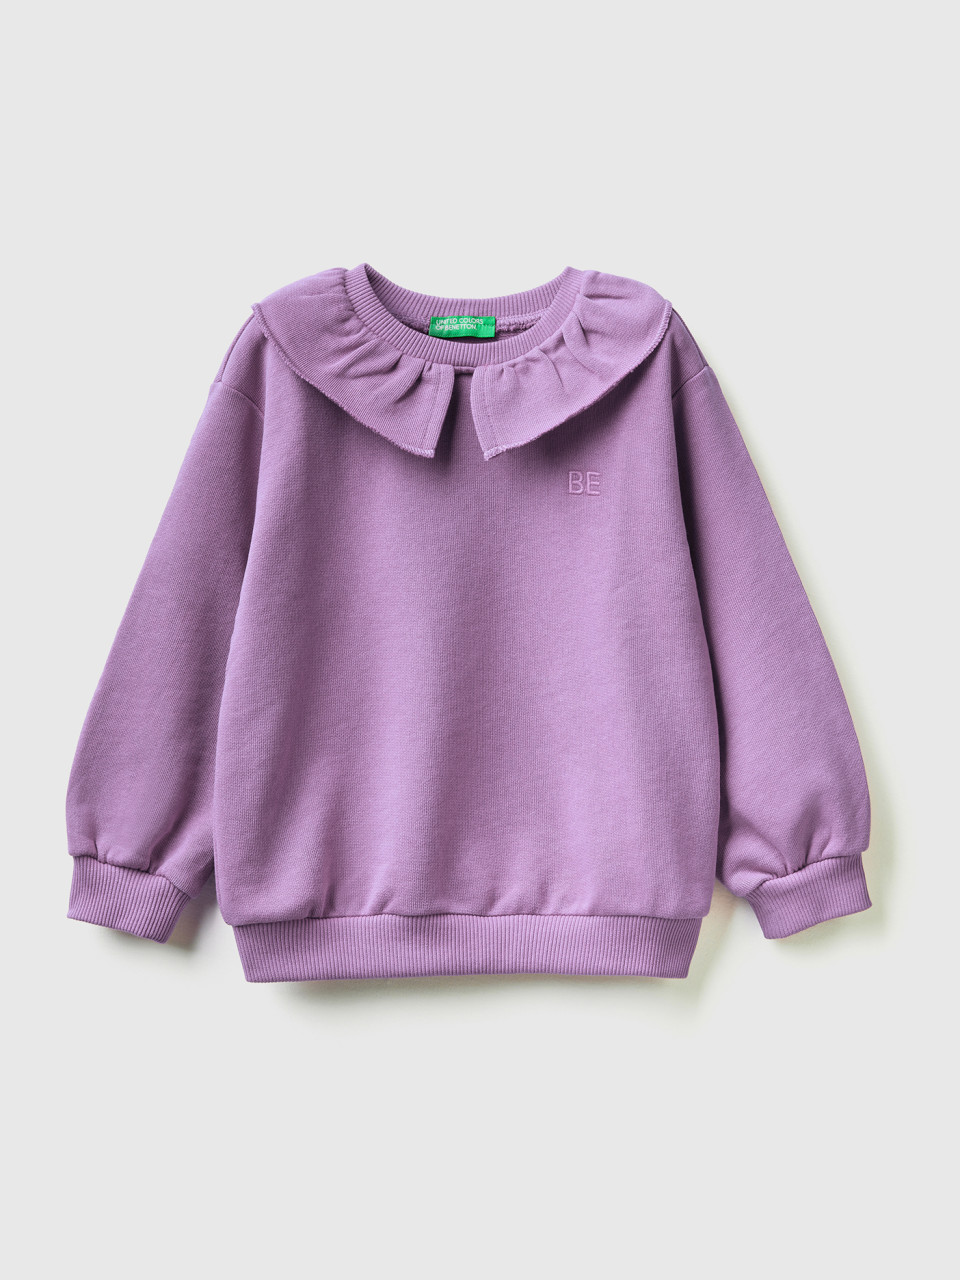 Benetton, Sweatshirt With Collar And be Embroidery, Mauve, Kids